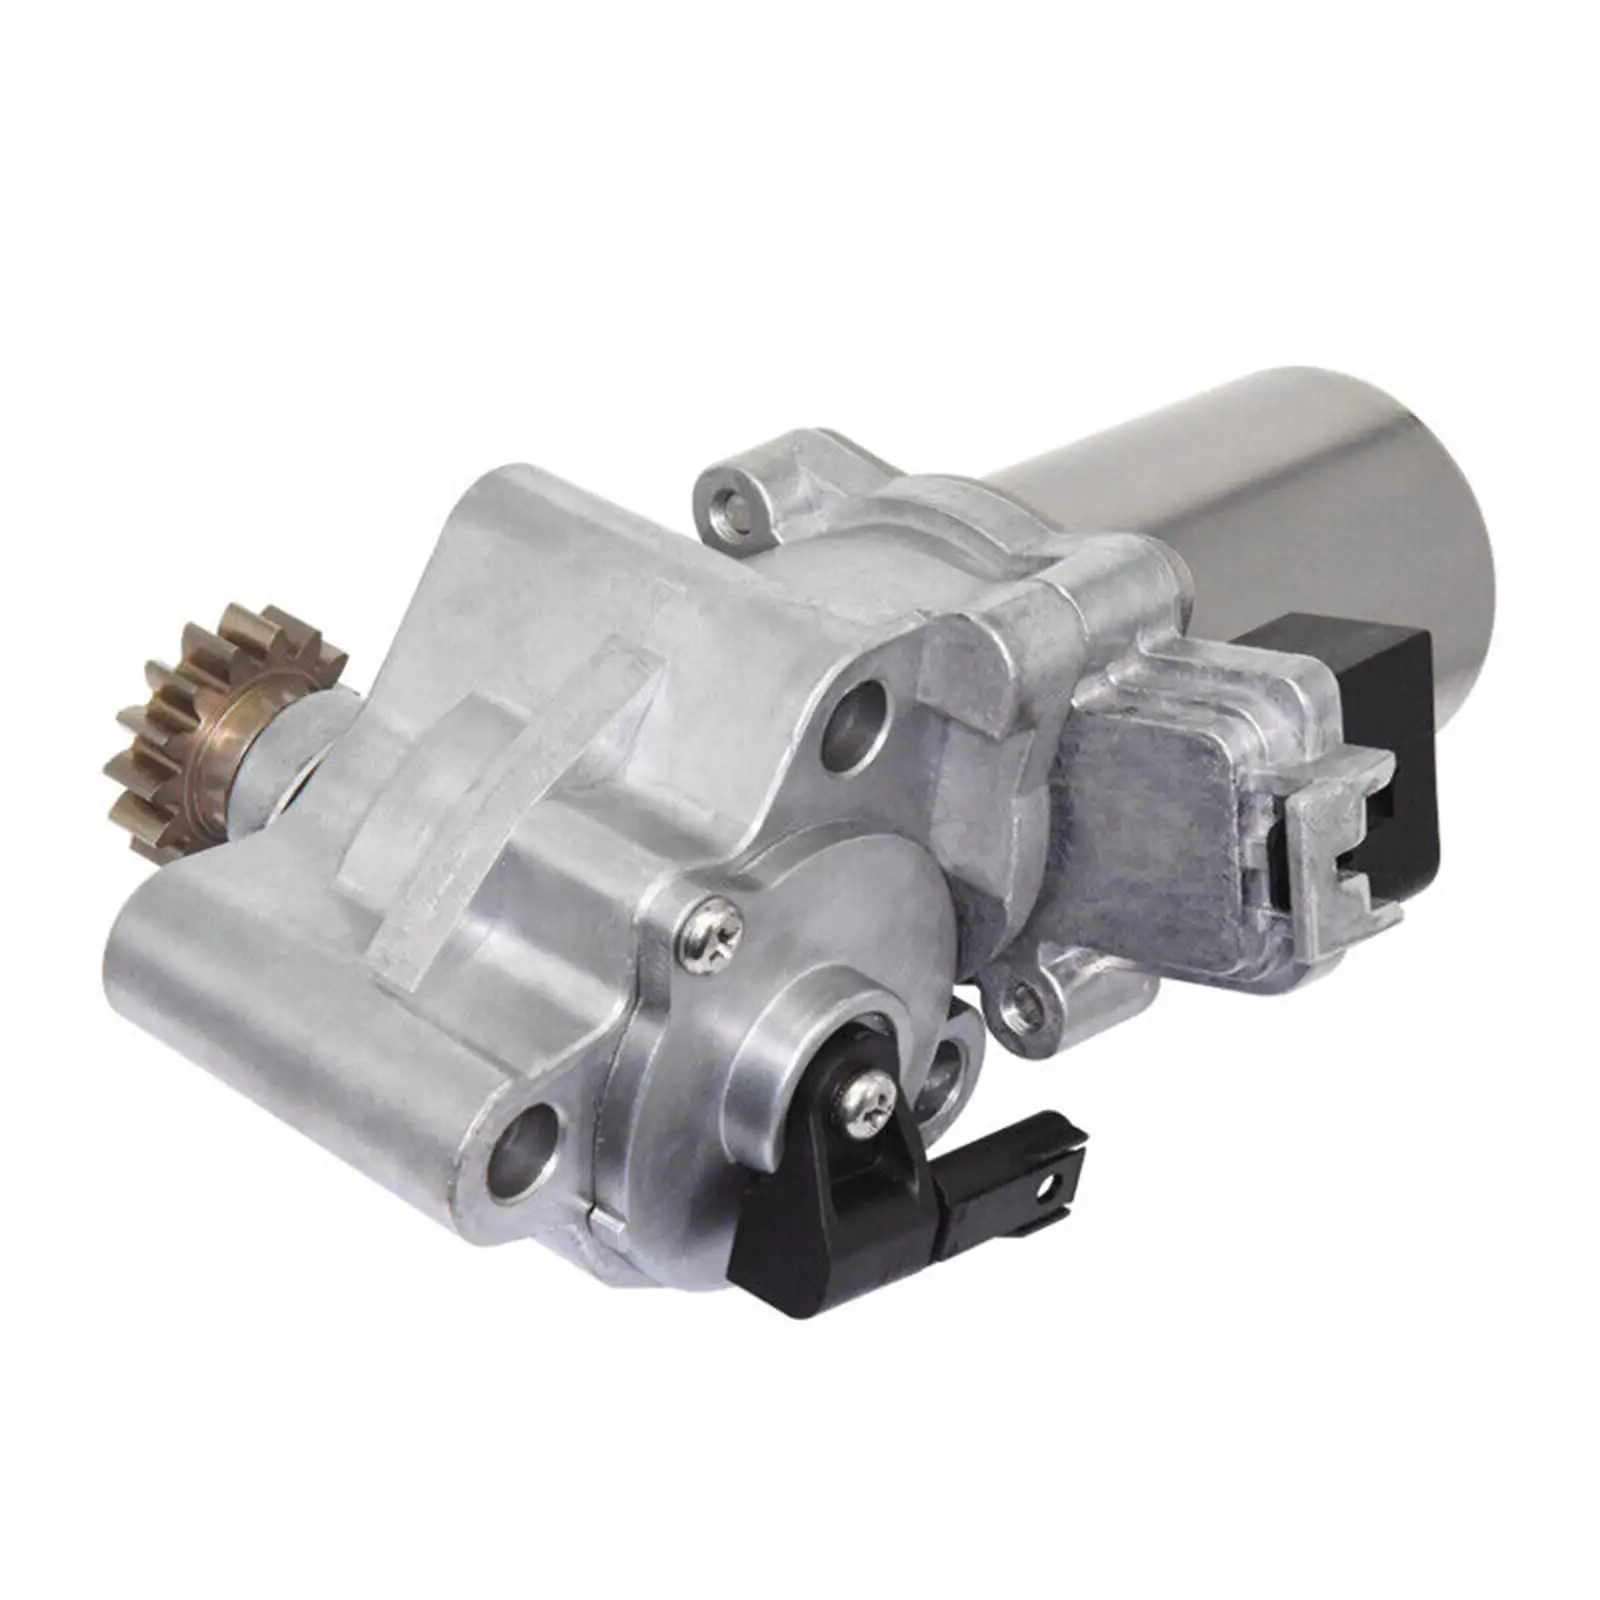 Transfer Case Motor Actuator Professional for BMW 328i 528i 530Xi 3.0L Replaces